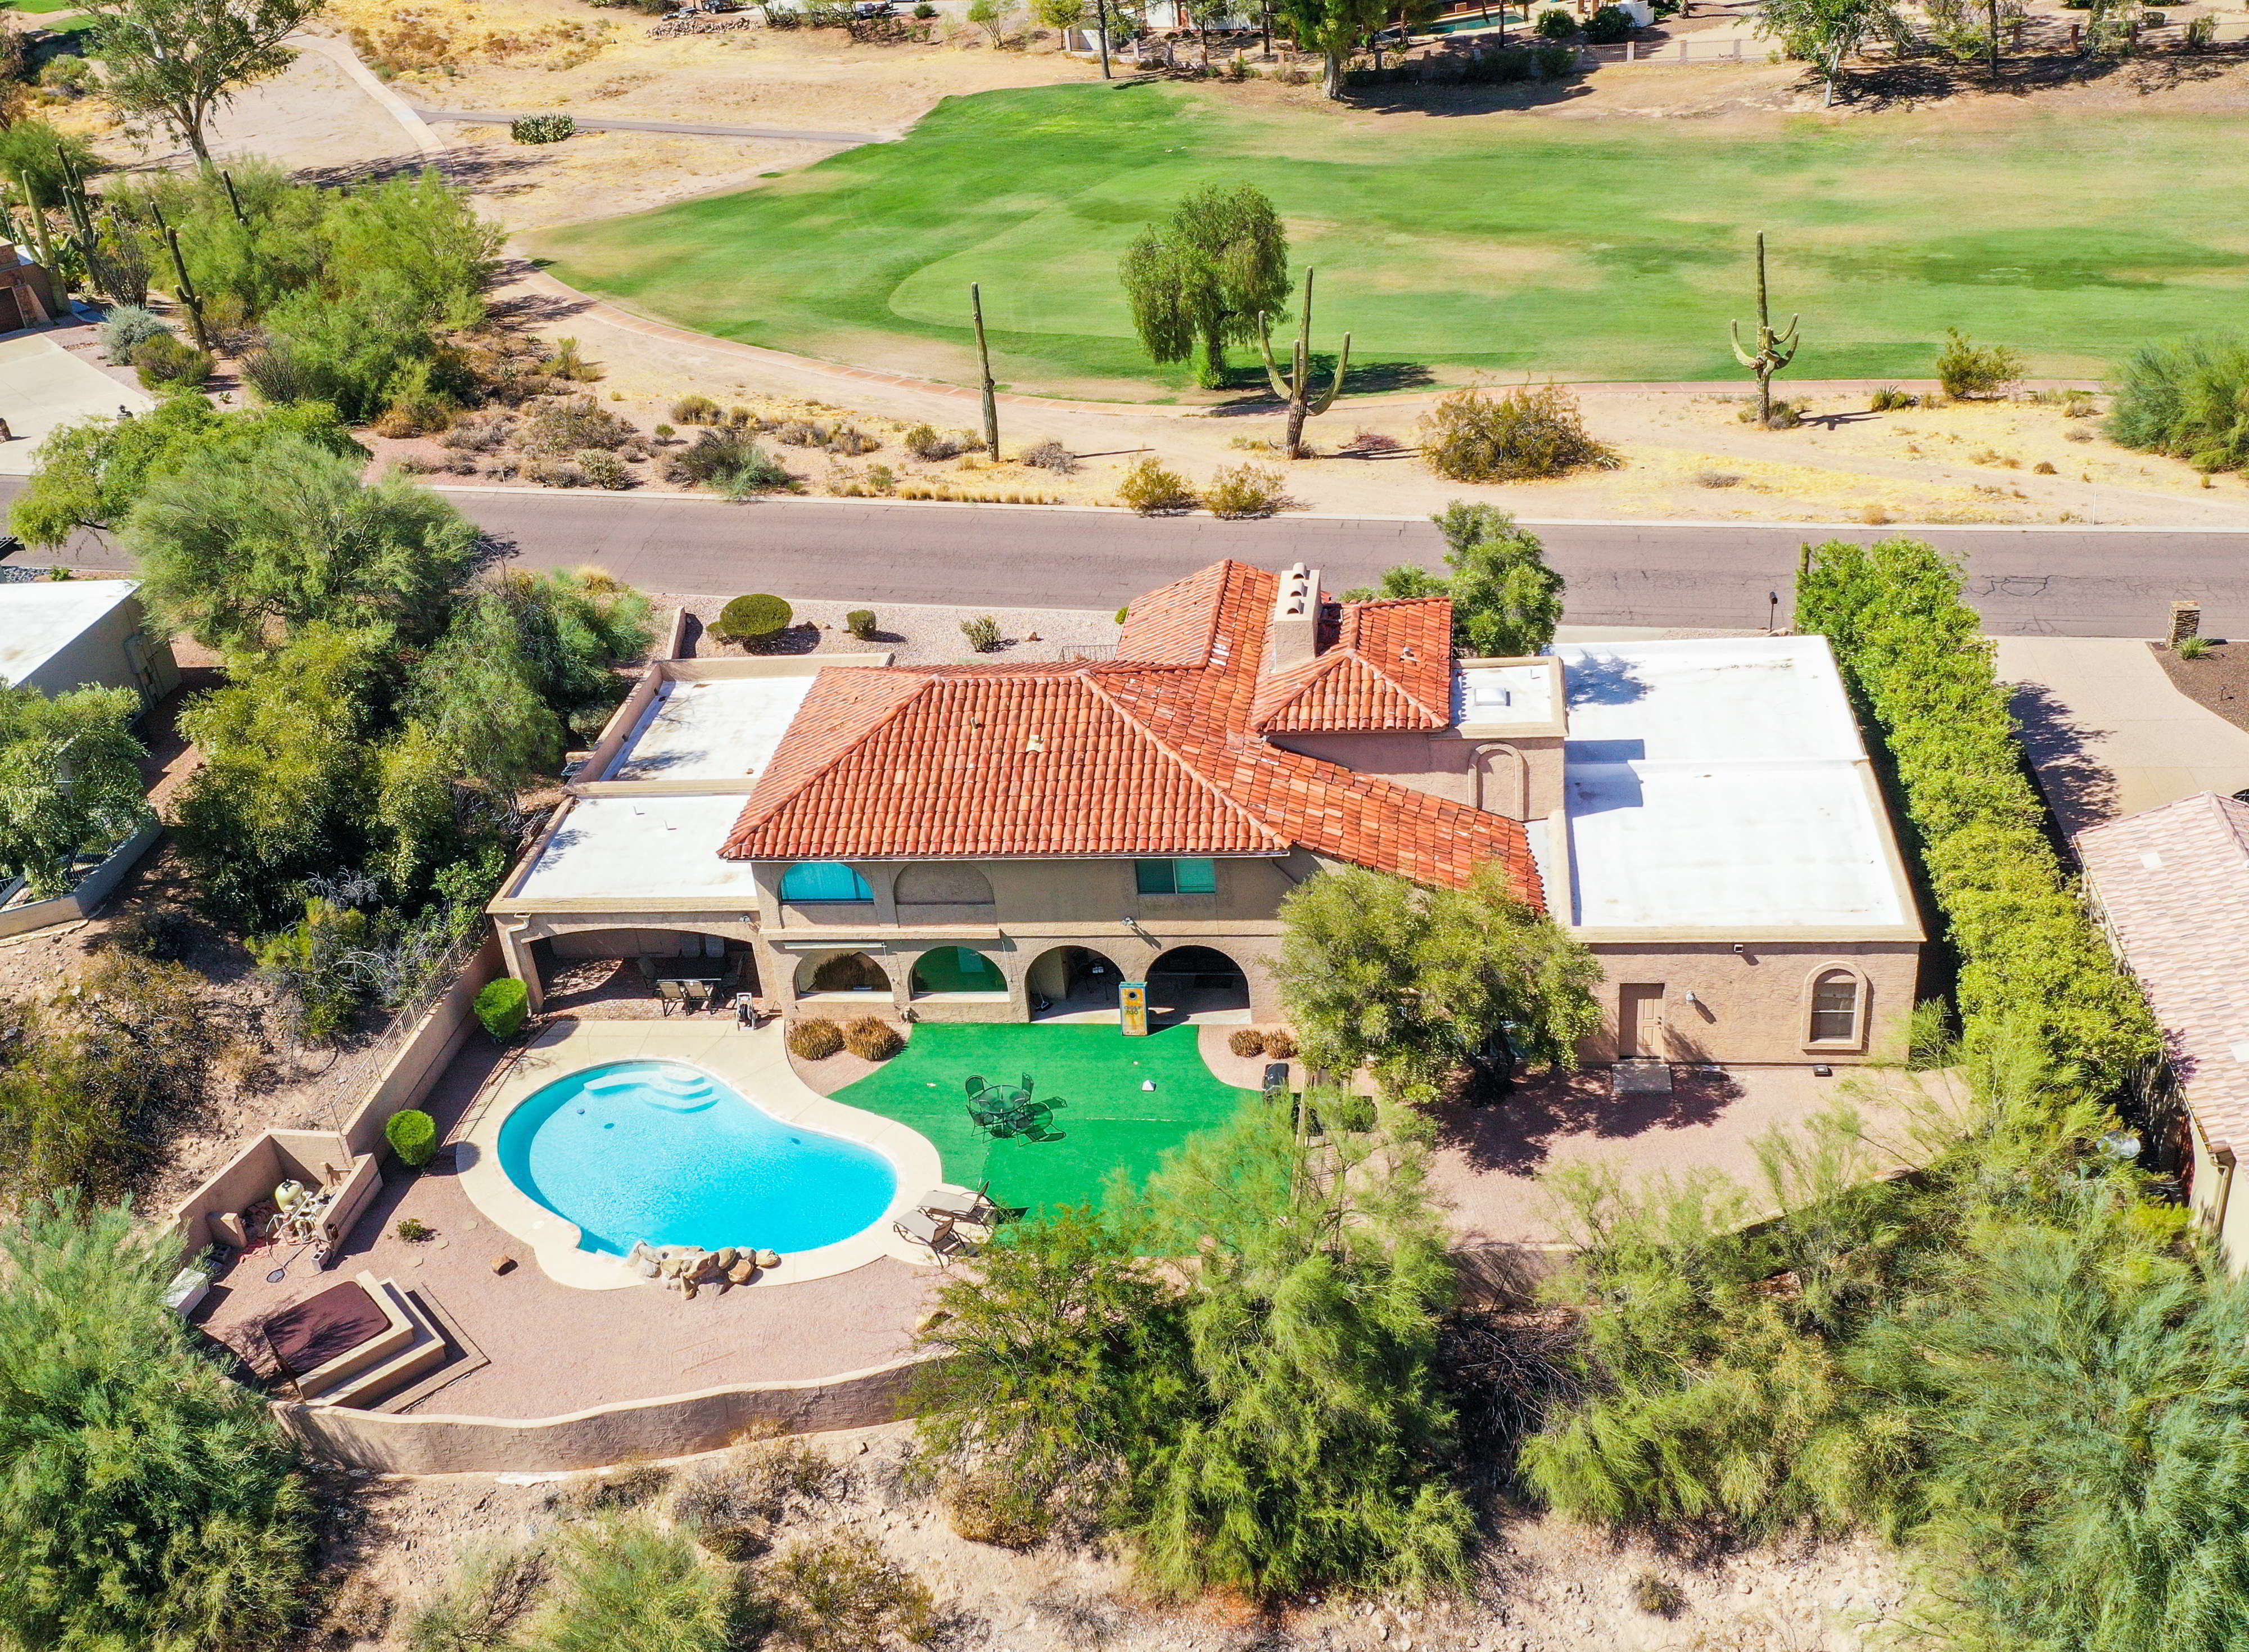 Golf Vacation Package - Fountain Hills Special - Private Home & 5 Rounds of Golf $245 per person per day